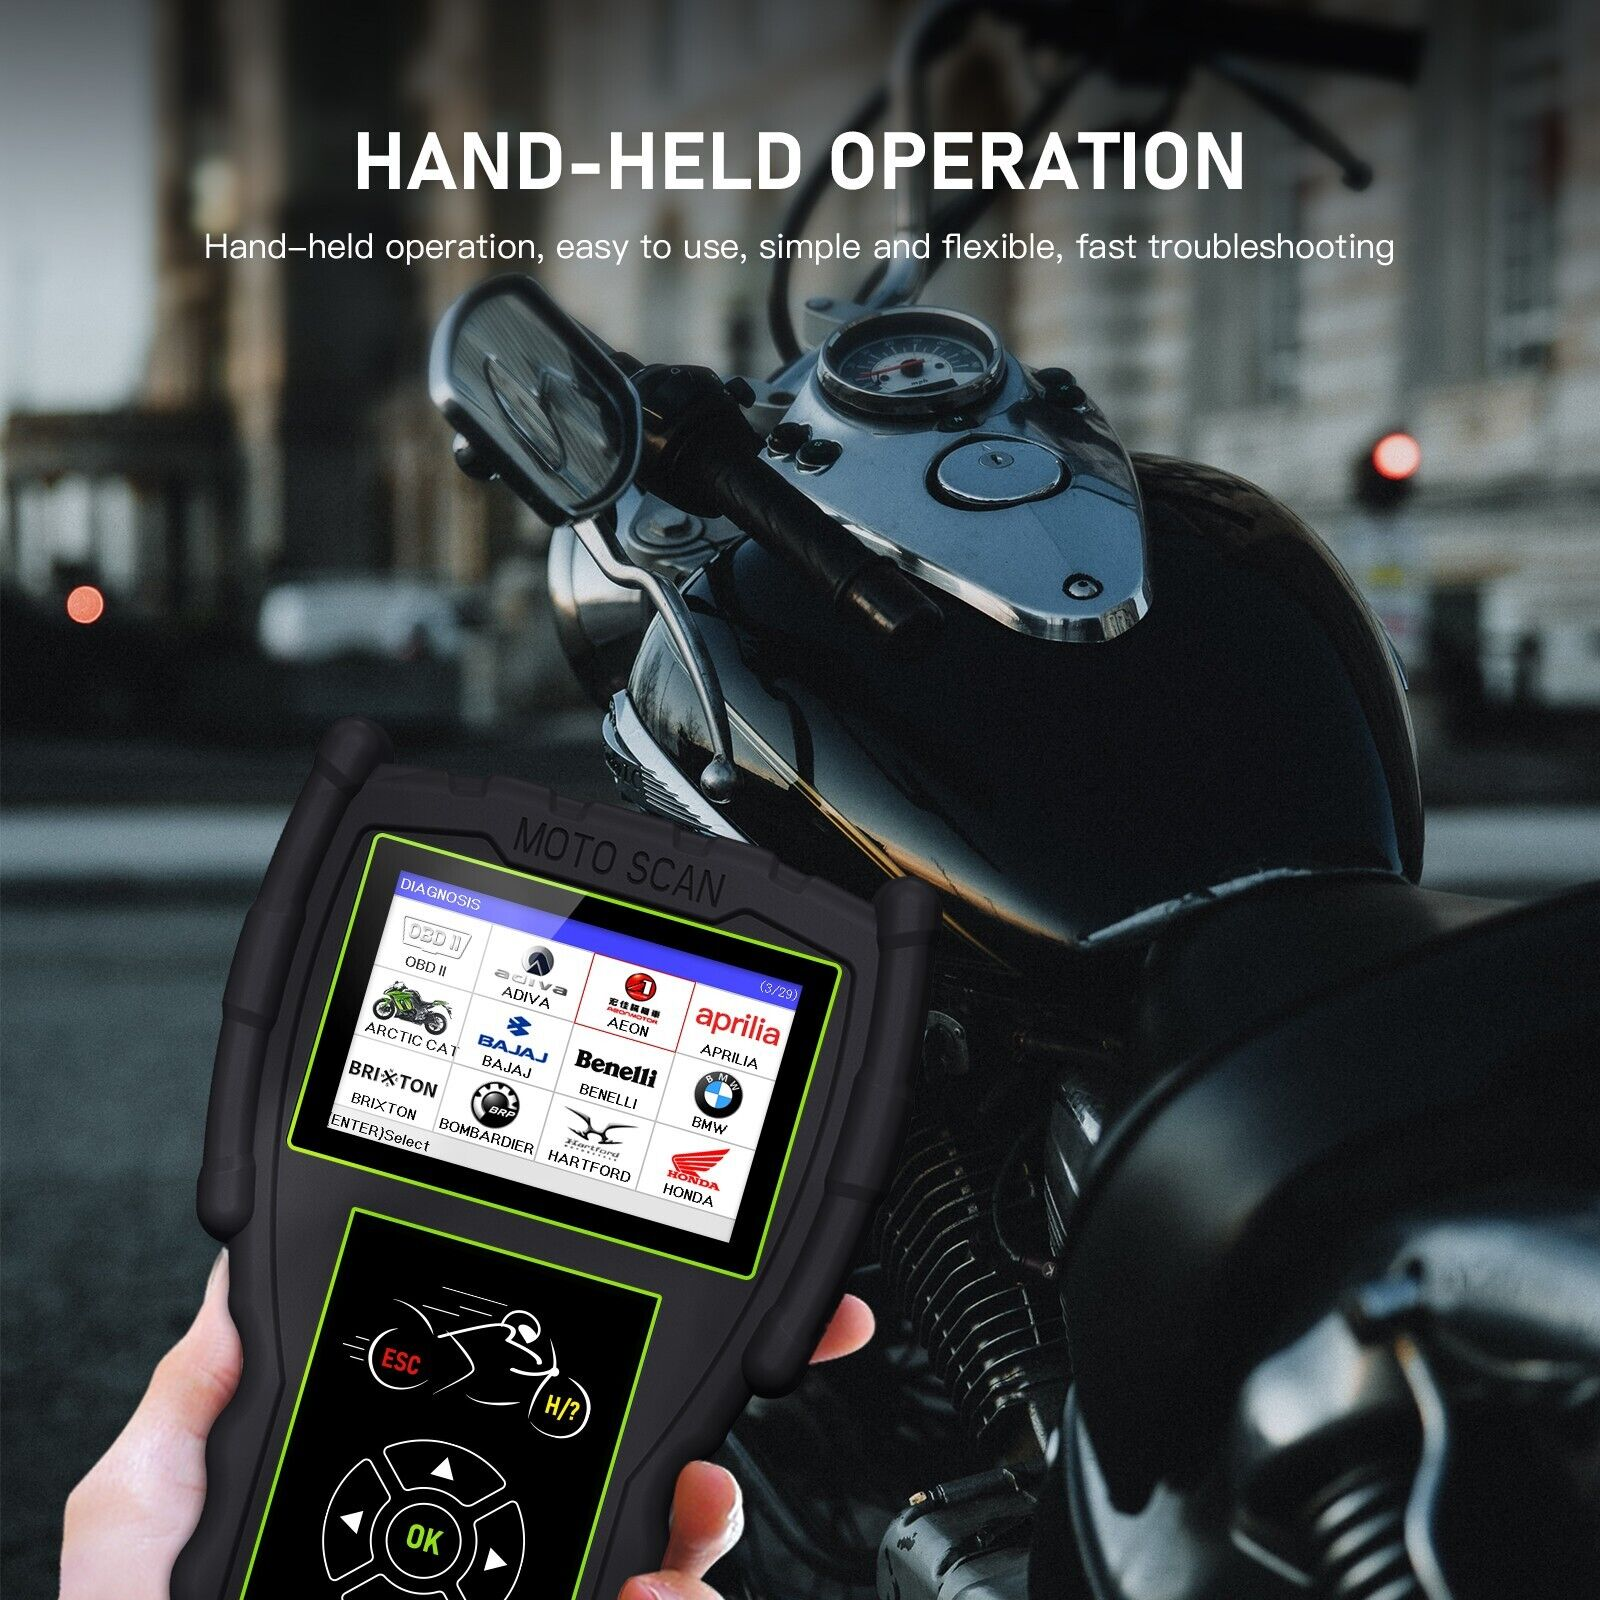 obd 2 scanner tool is a Hand-held devices